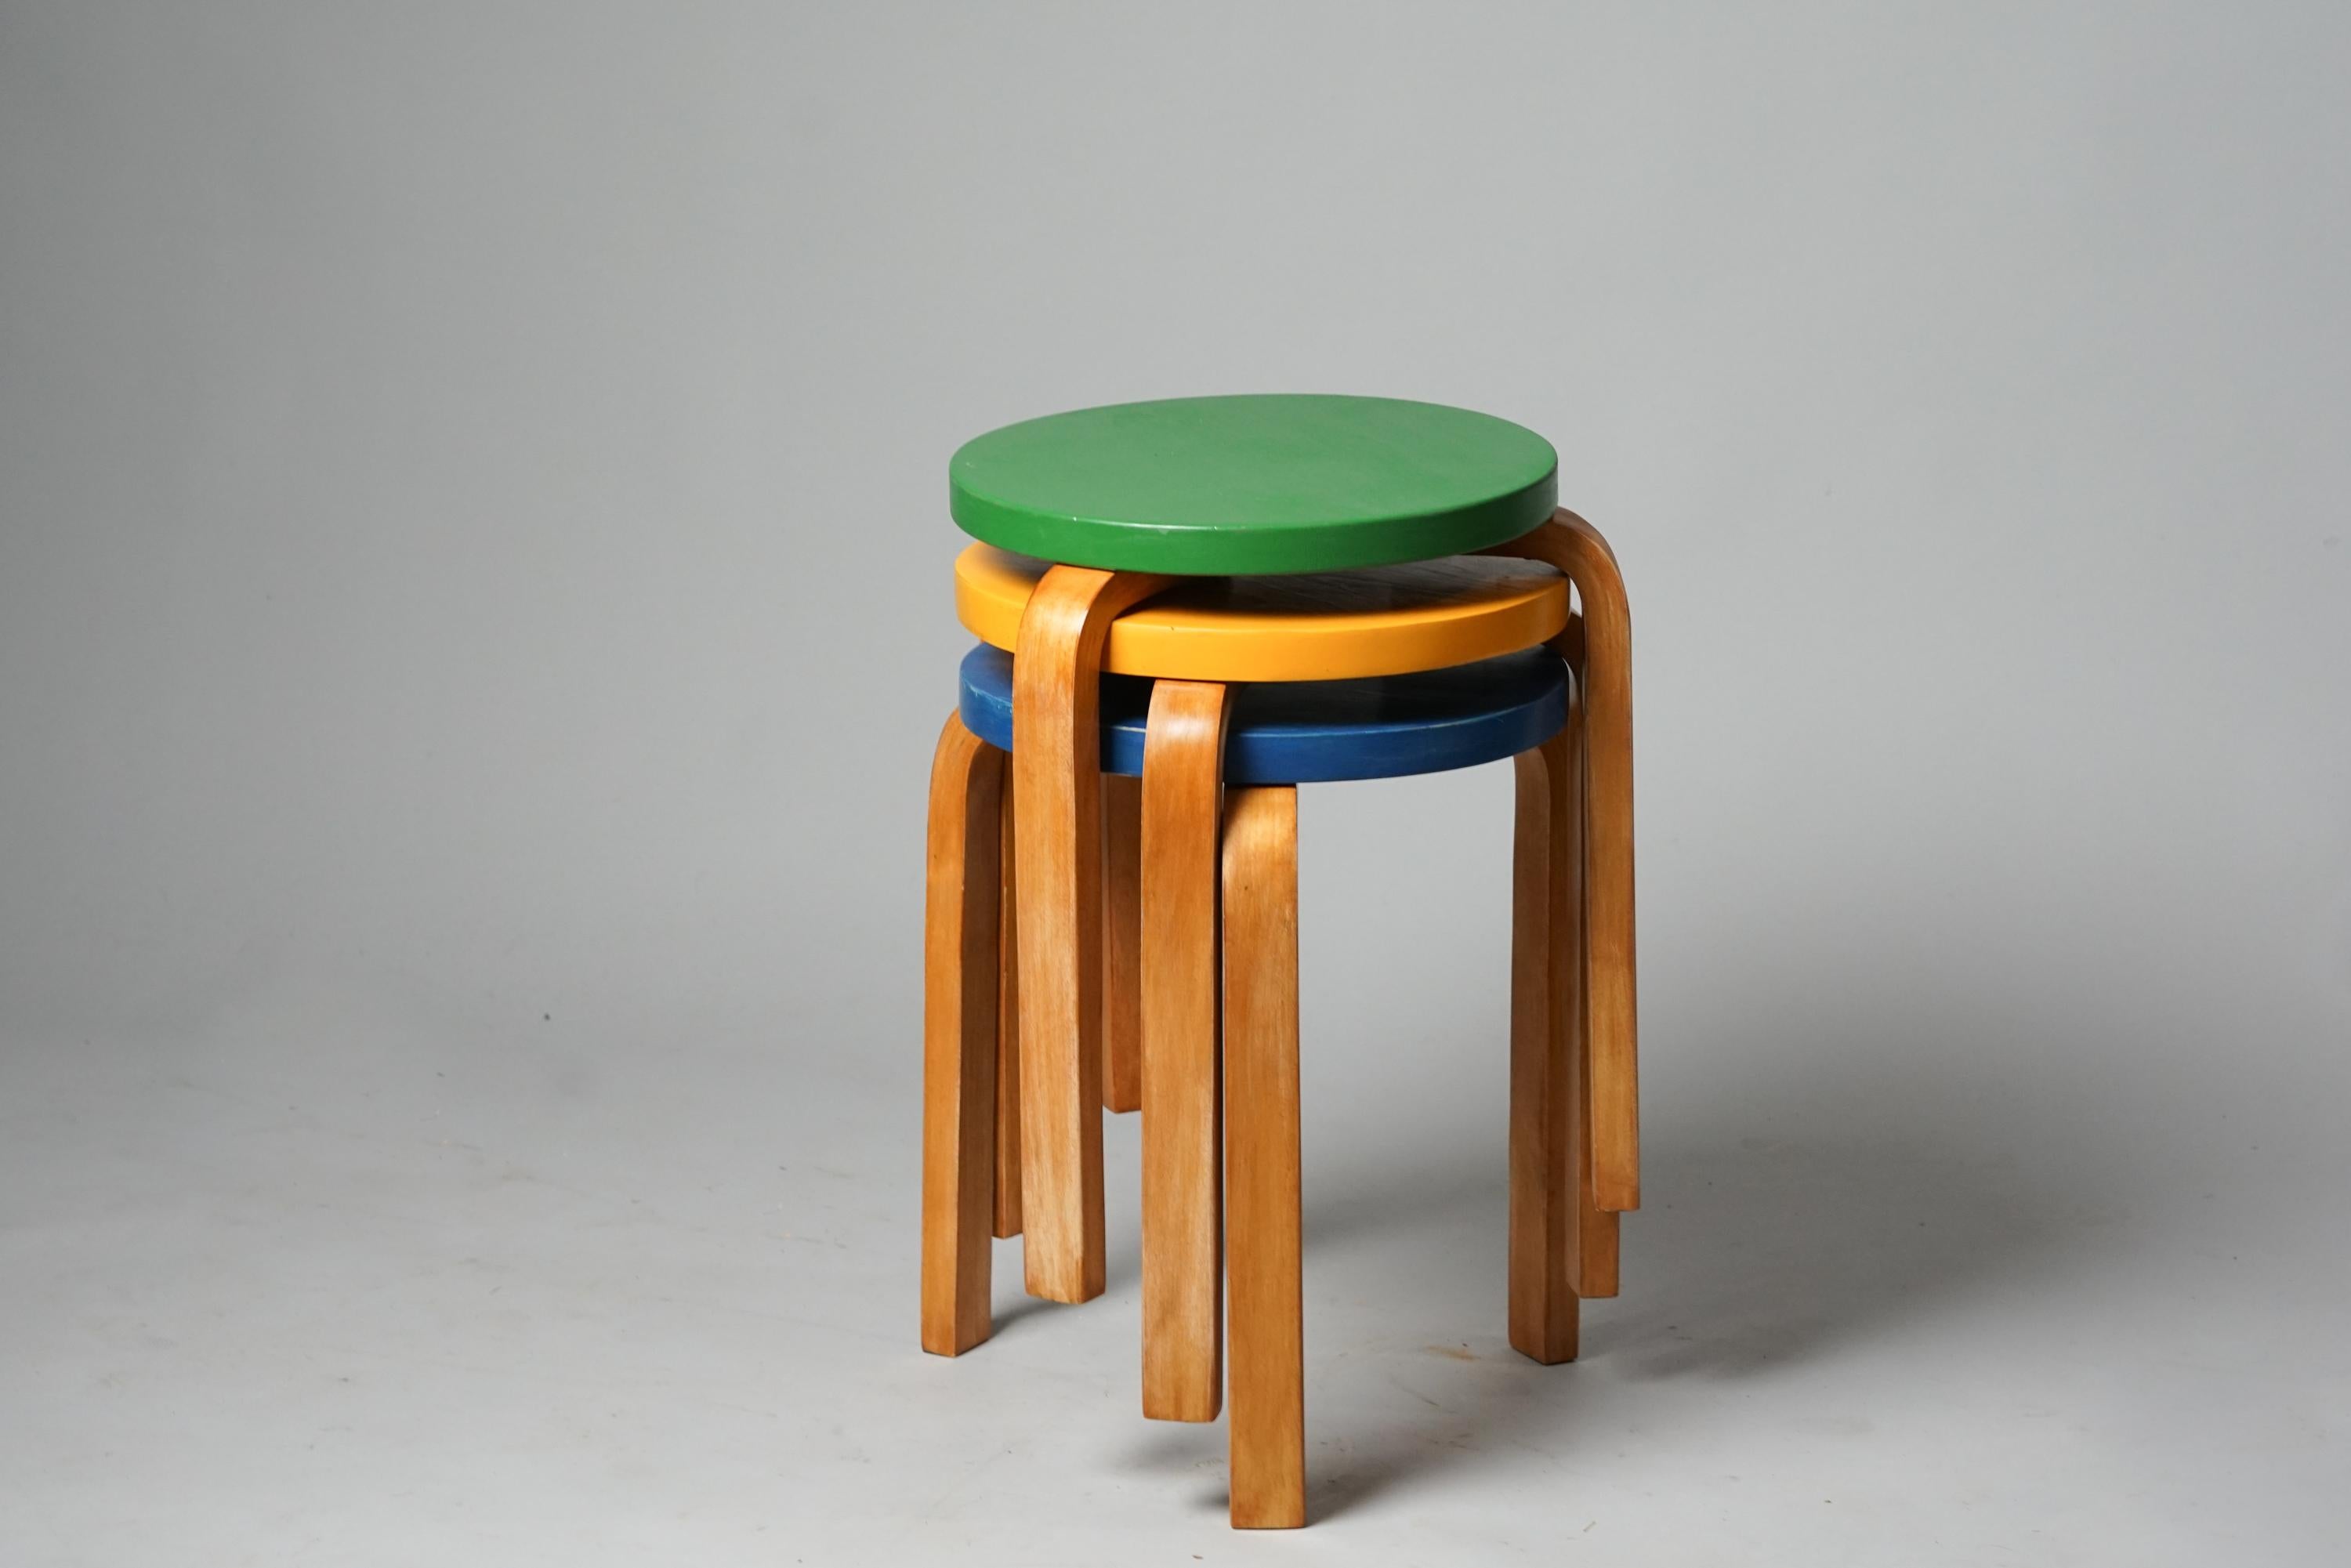 Set of three Model 60 stools, design by Alvar Aalto, manufactured by Oy Huonekalu- ja Rakennustyötehdas Ab, 1930s. Birch with painted seat. Good vintage condition, minor patina and wear consistent with age and use. The stools are sold as a set.